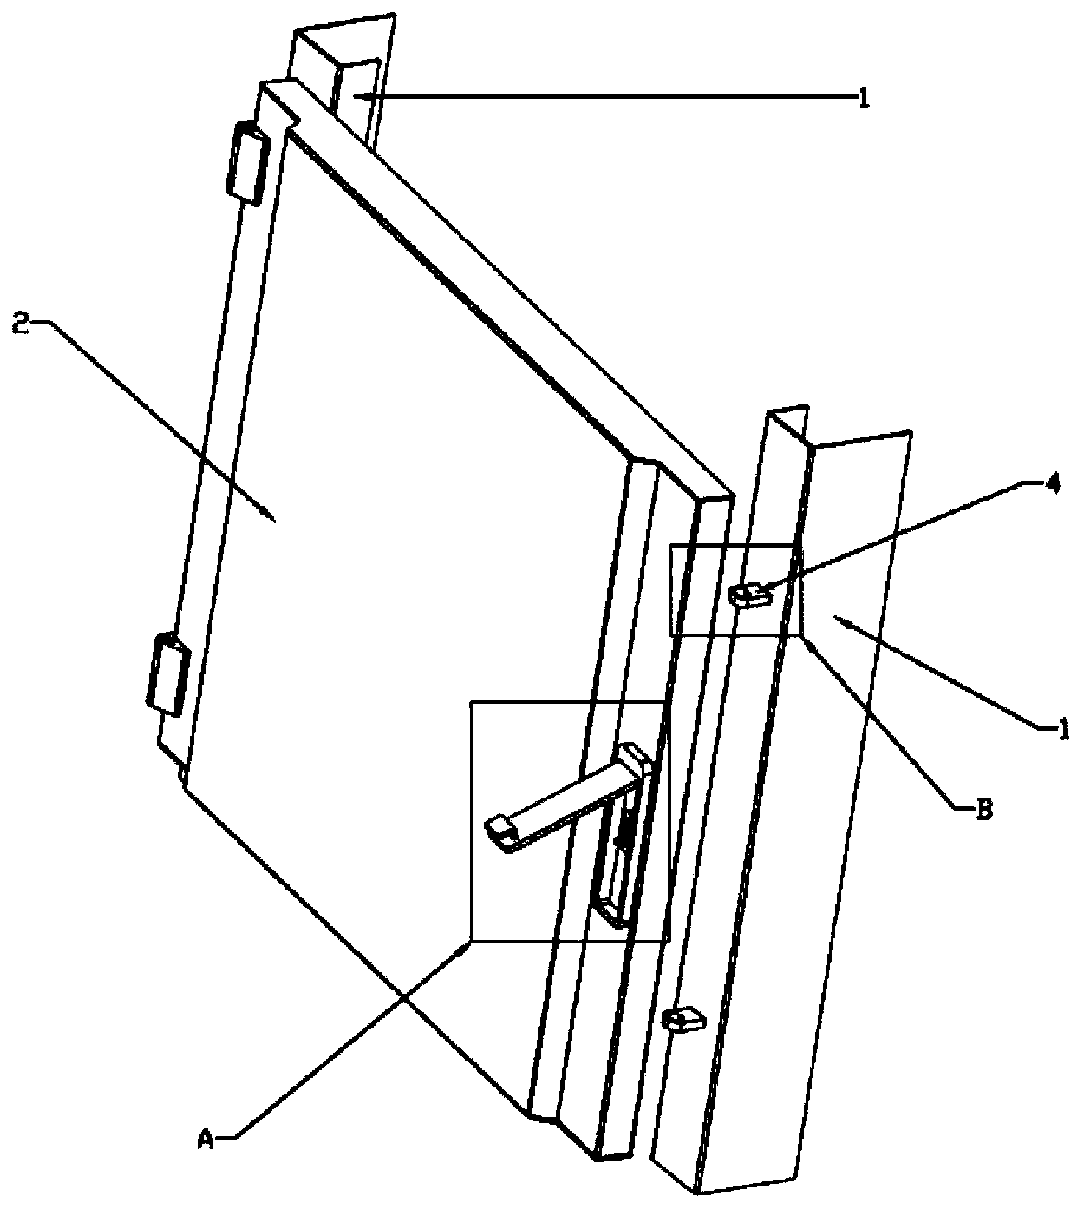 Cabinet door structure of a central switch cabinet